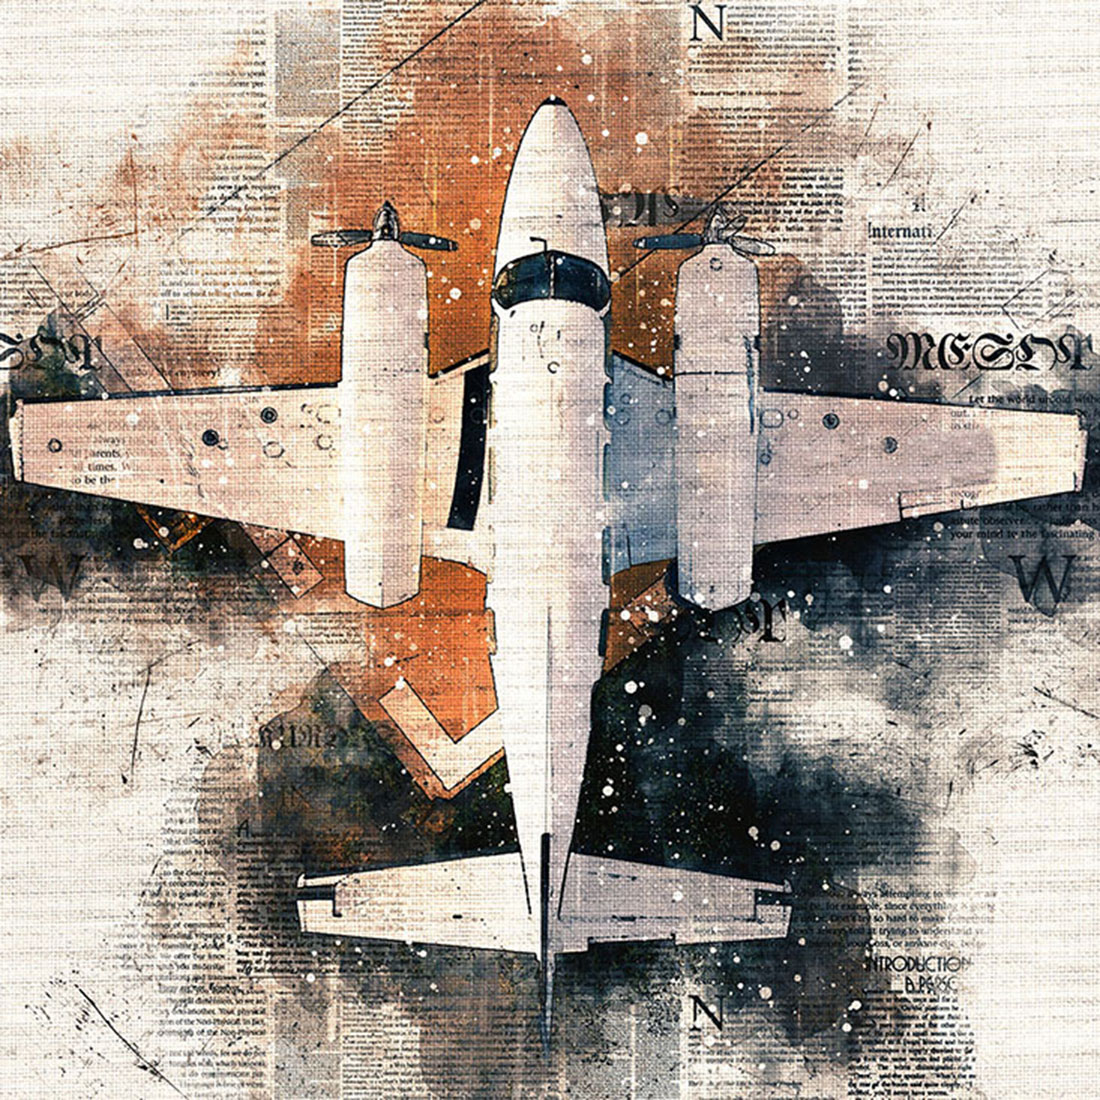 Aircraft HQ Graphics with Rustic Style cover image.